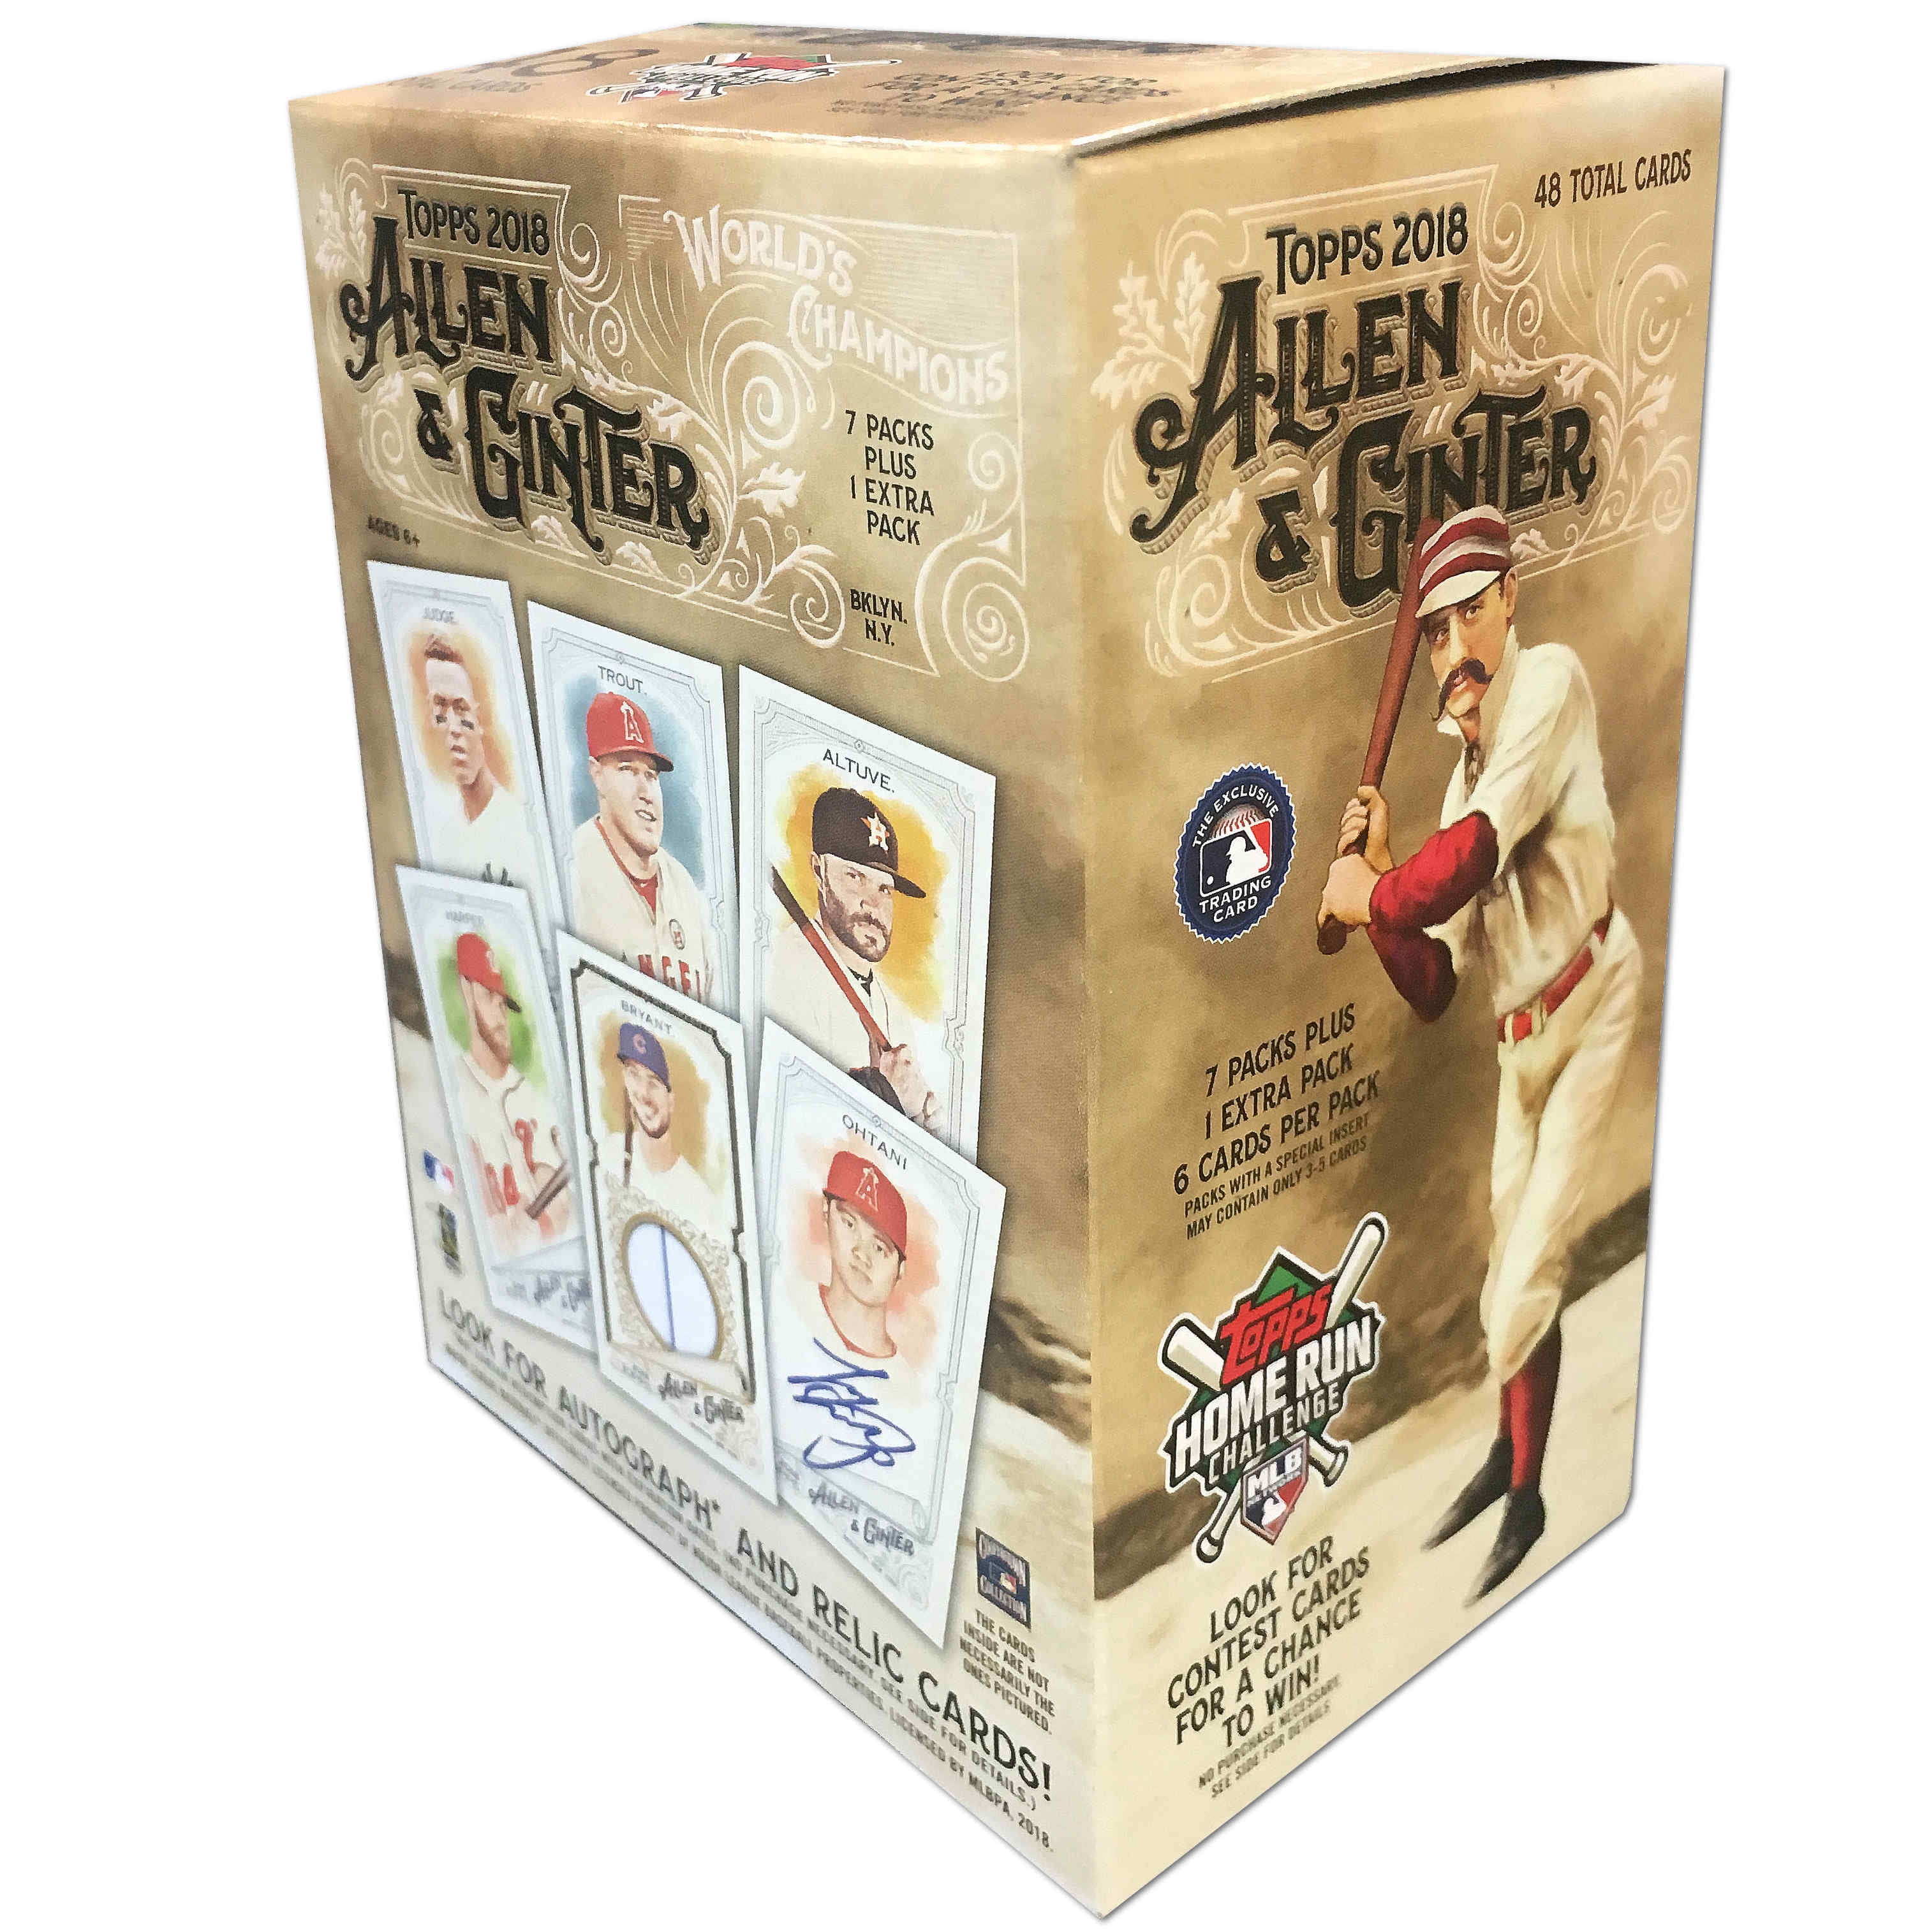 2018 Topps Allen & Ginter Boston Red Sox Master Team Set 25 Cards SP Inserts 